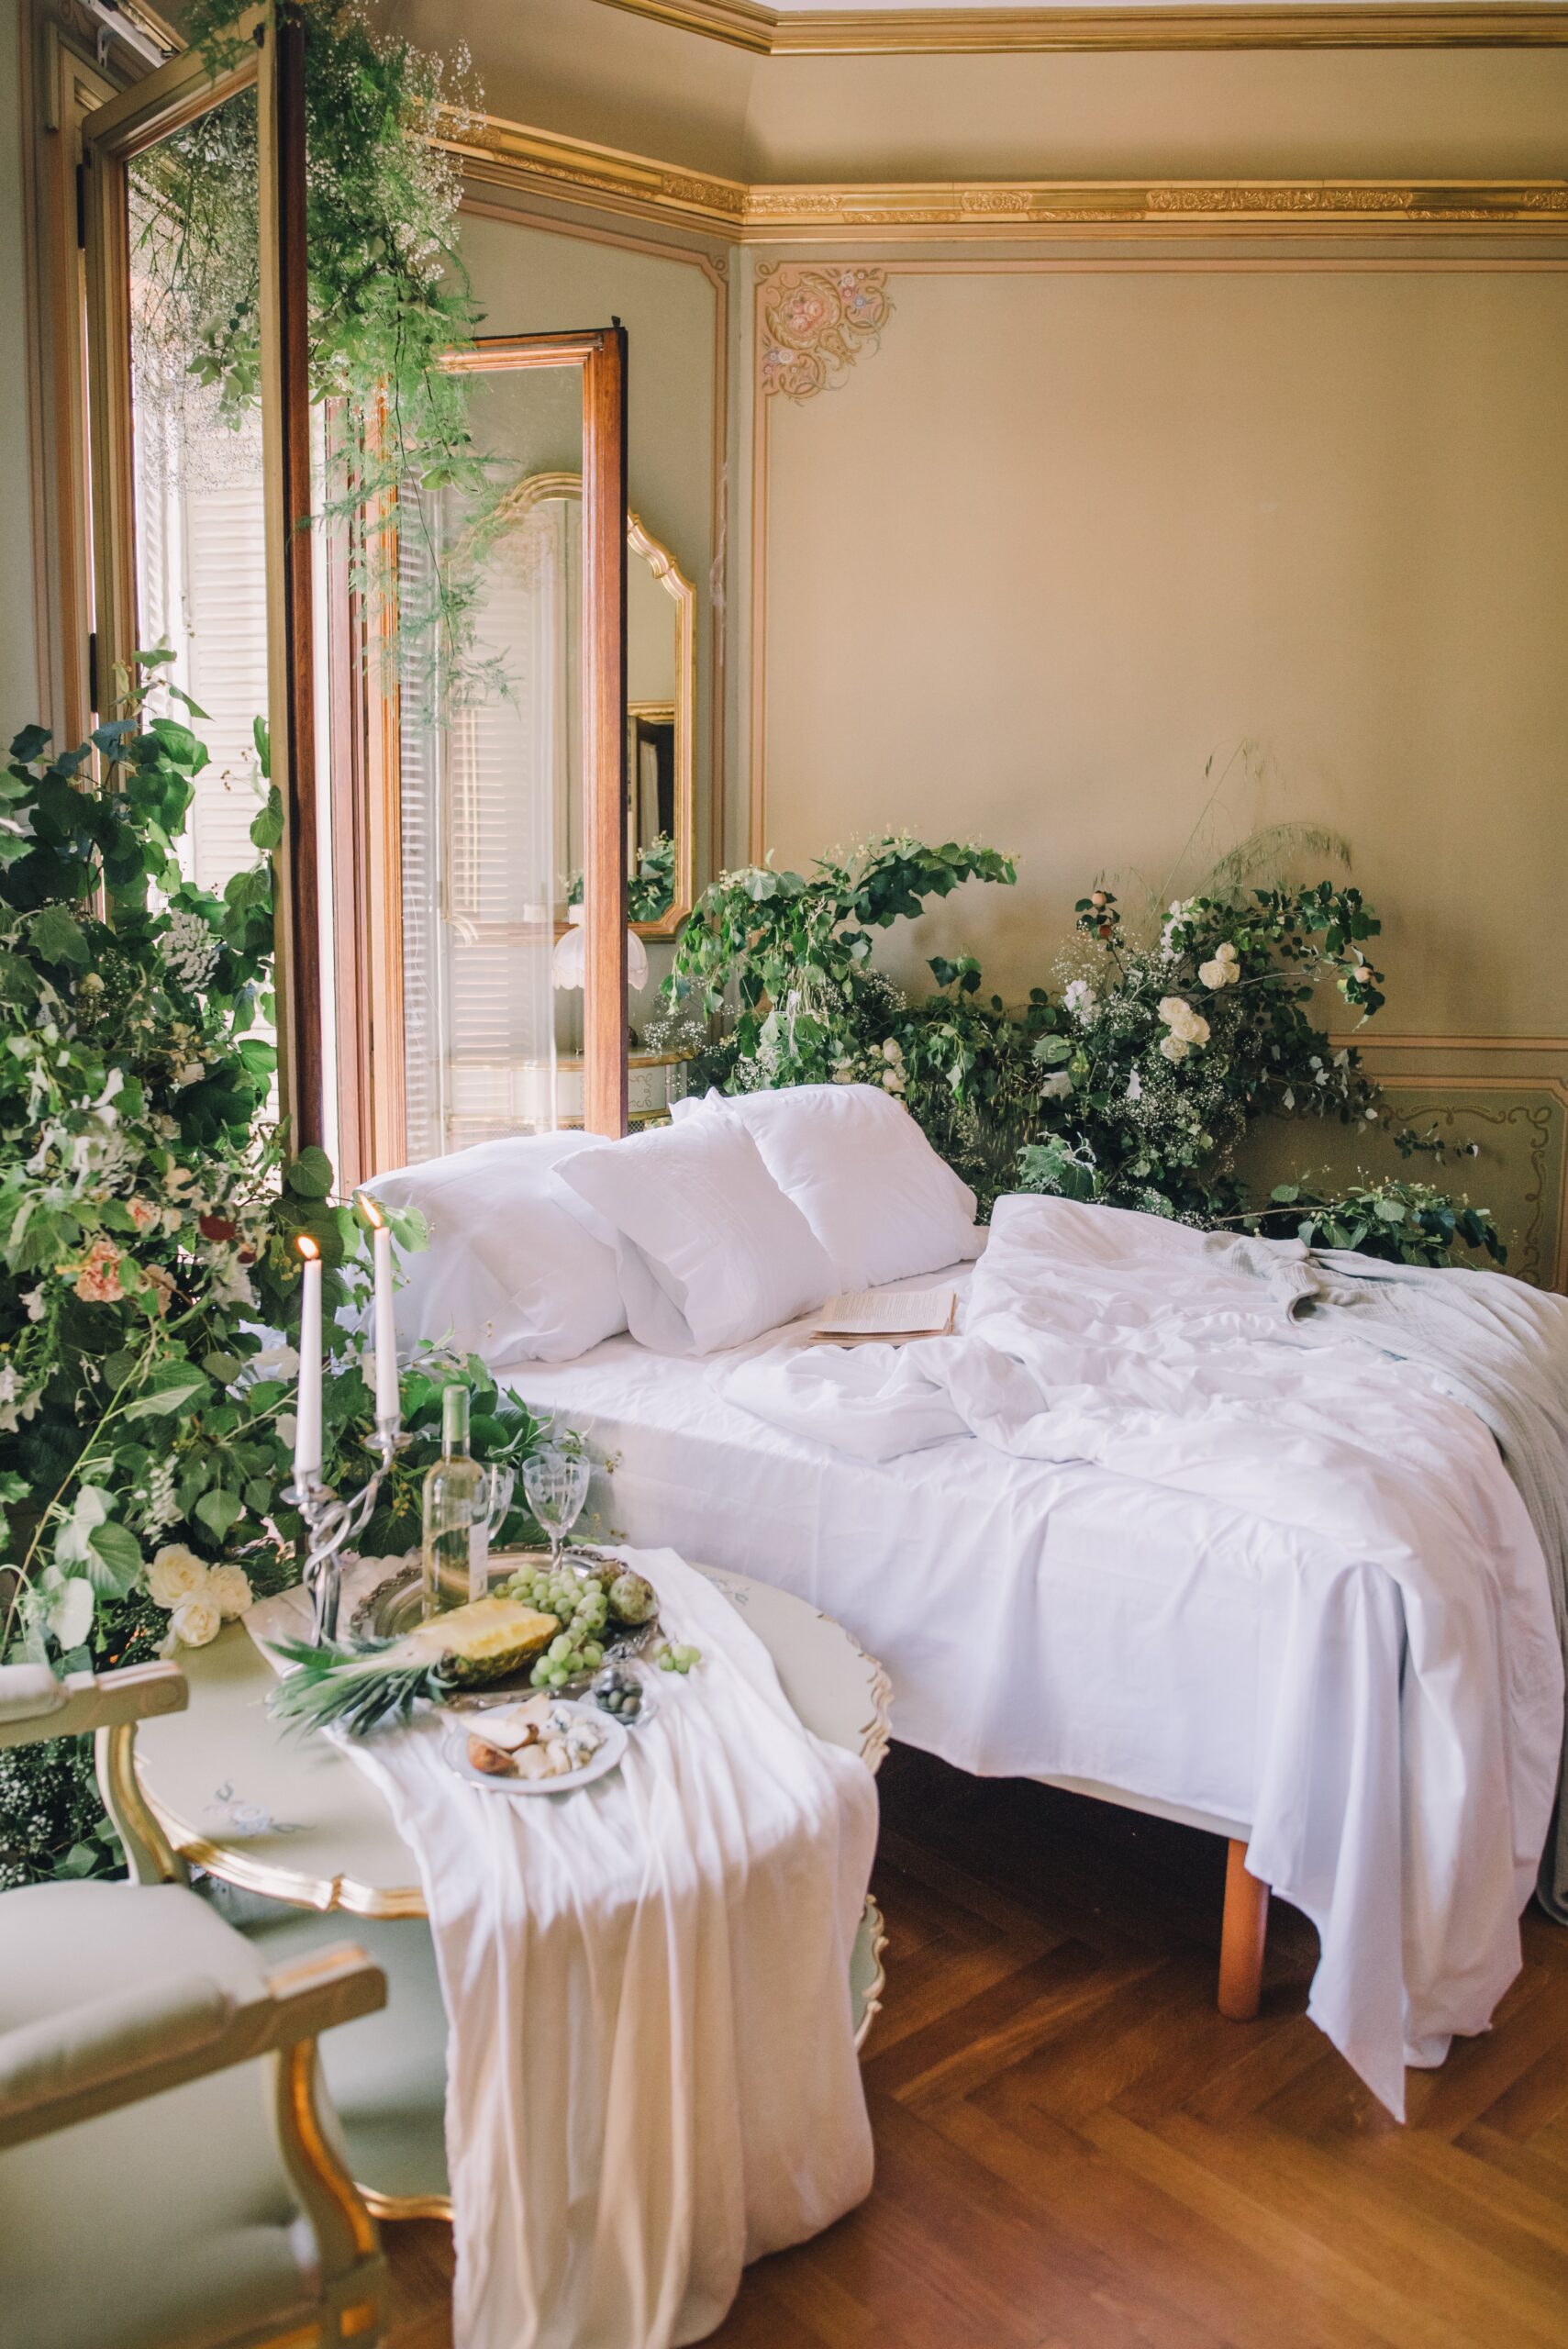 A bed surrounded with plants